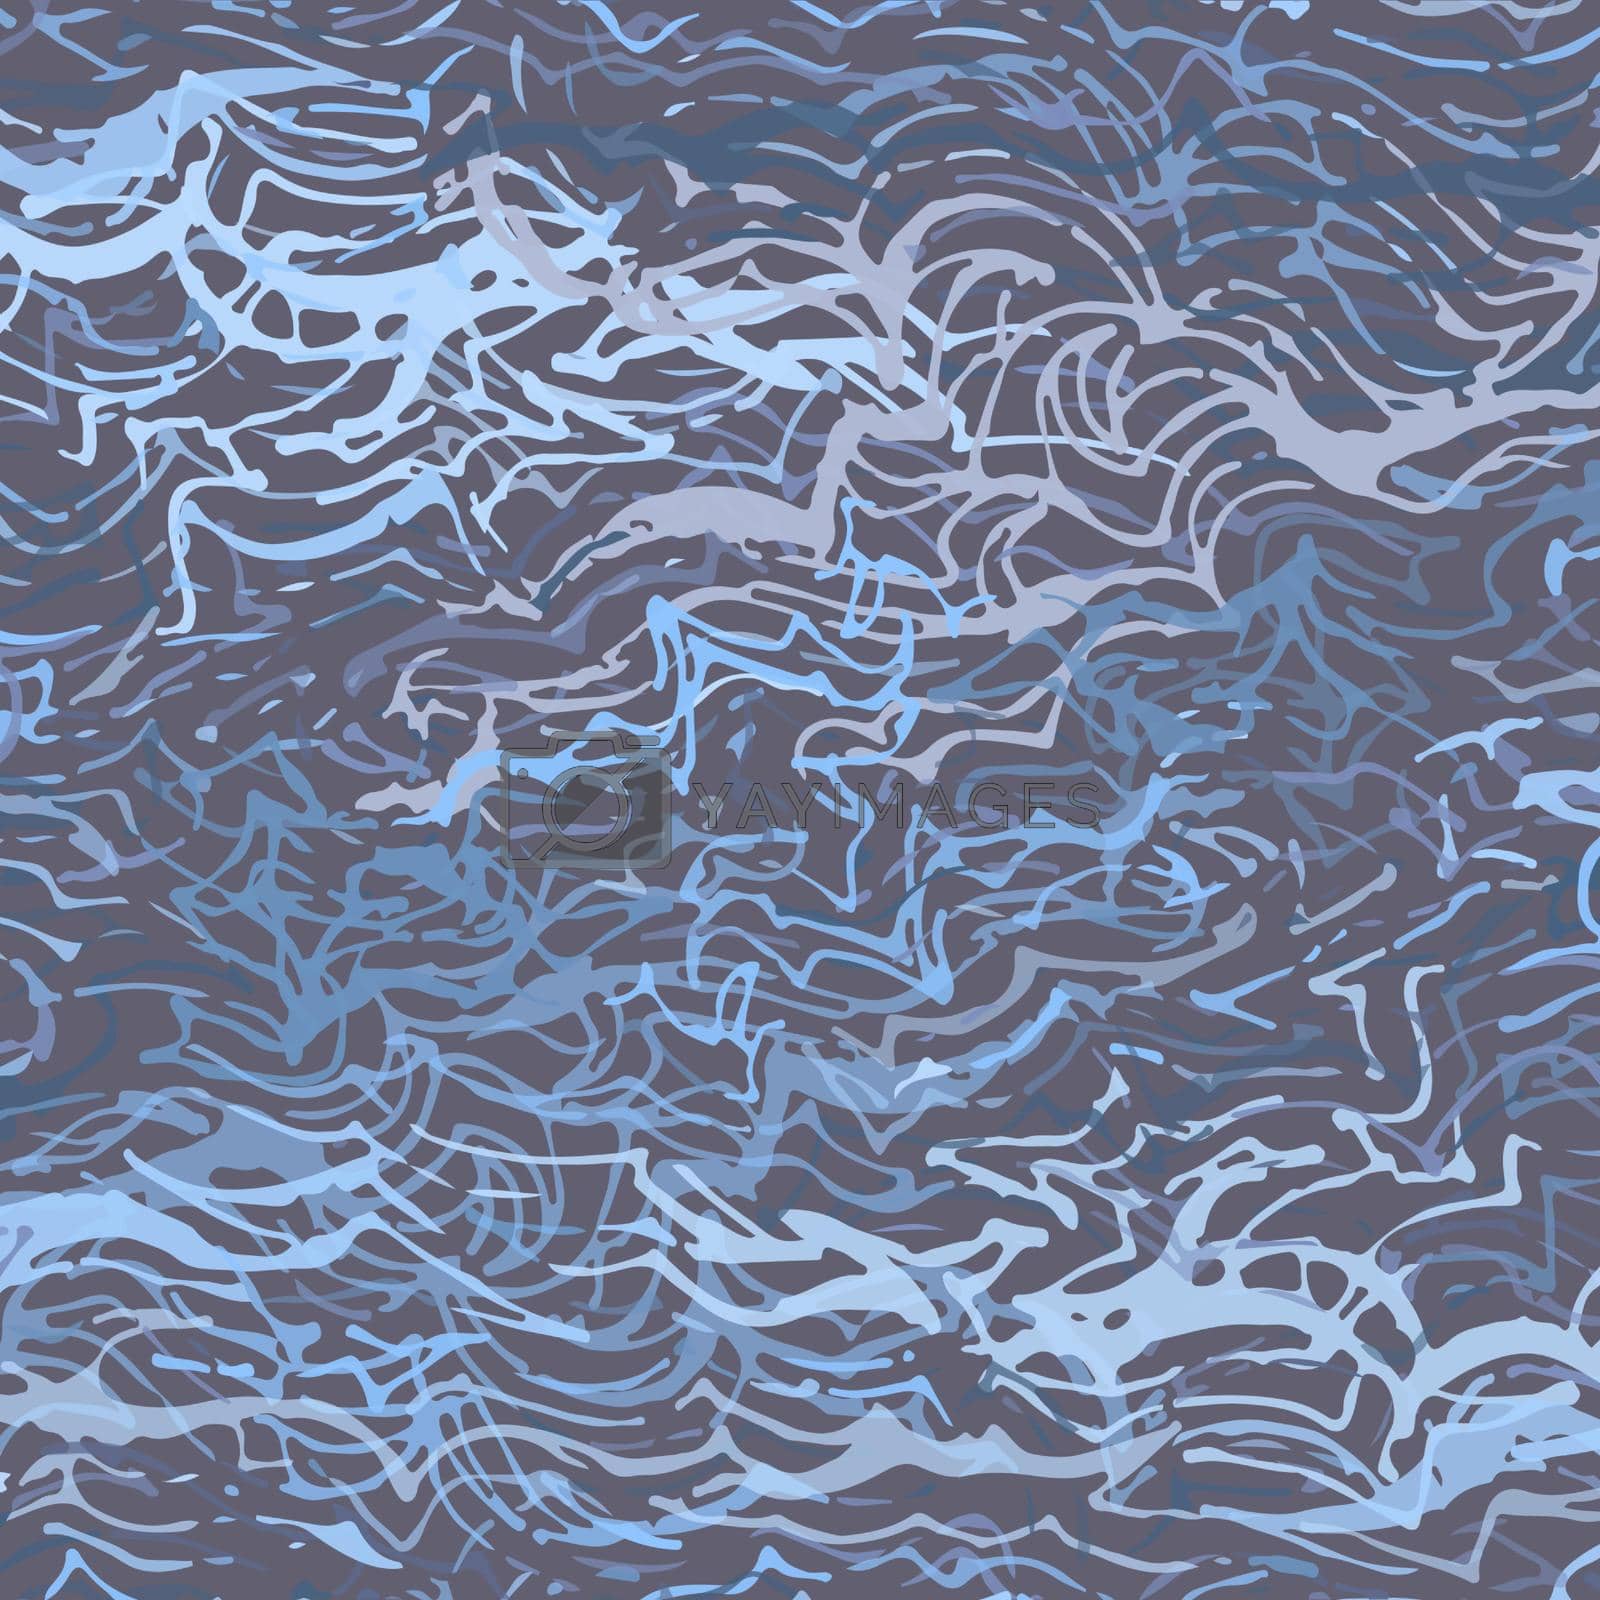 Royalty free image of Funny horizontal background of chaotic wavy lines. Multi colored patterns. by Pakaliuyeva